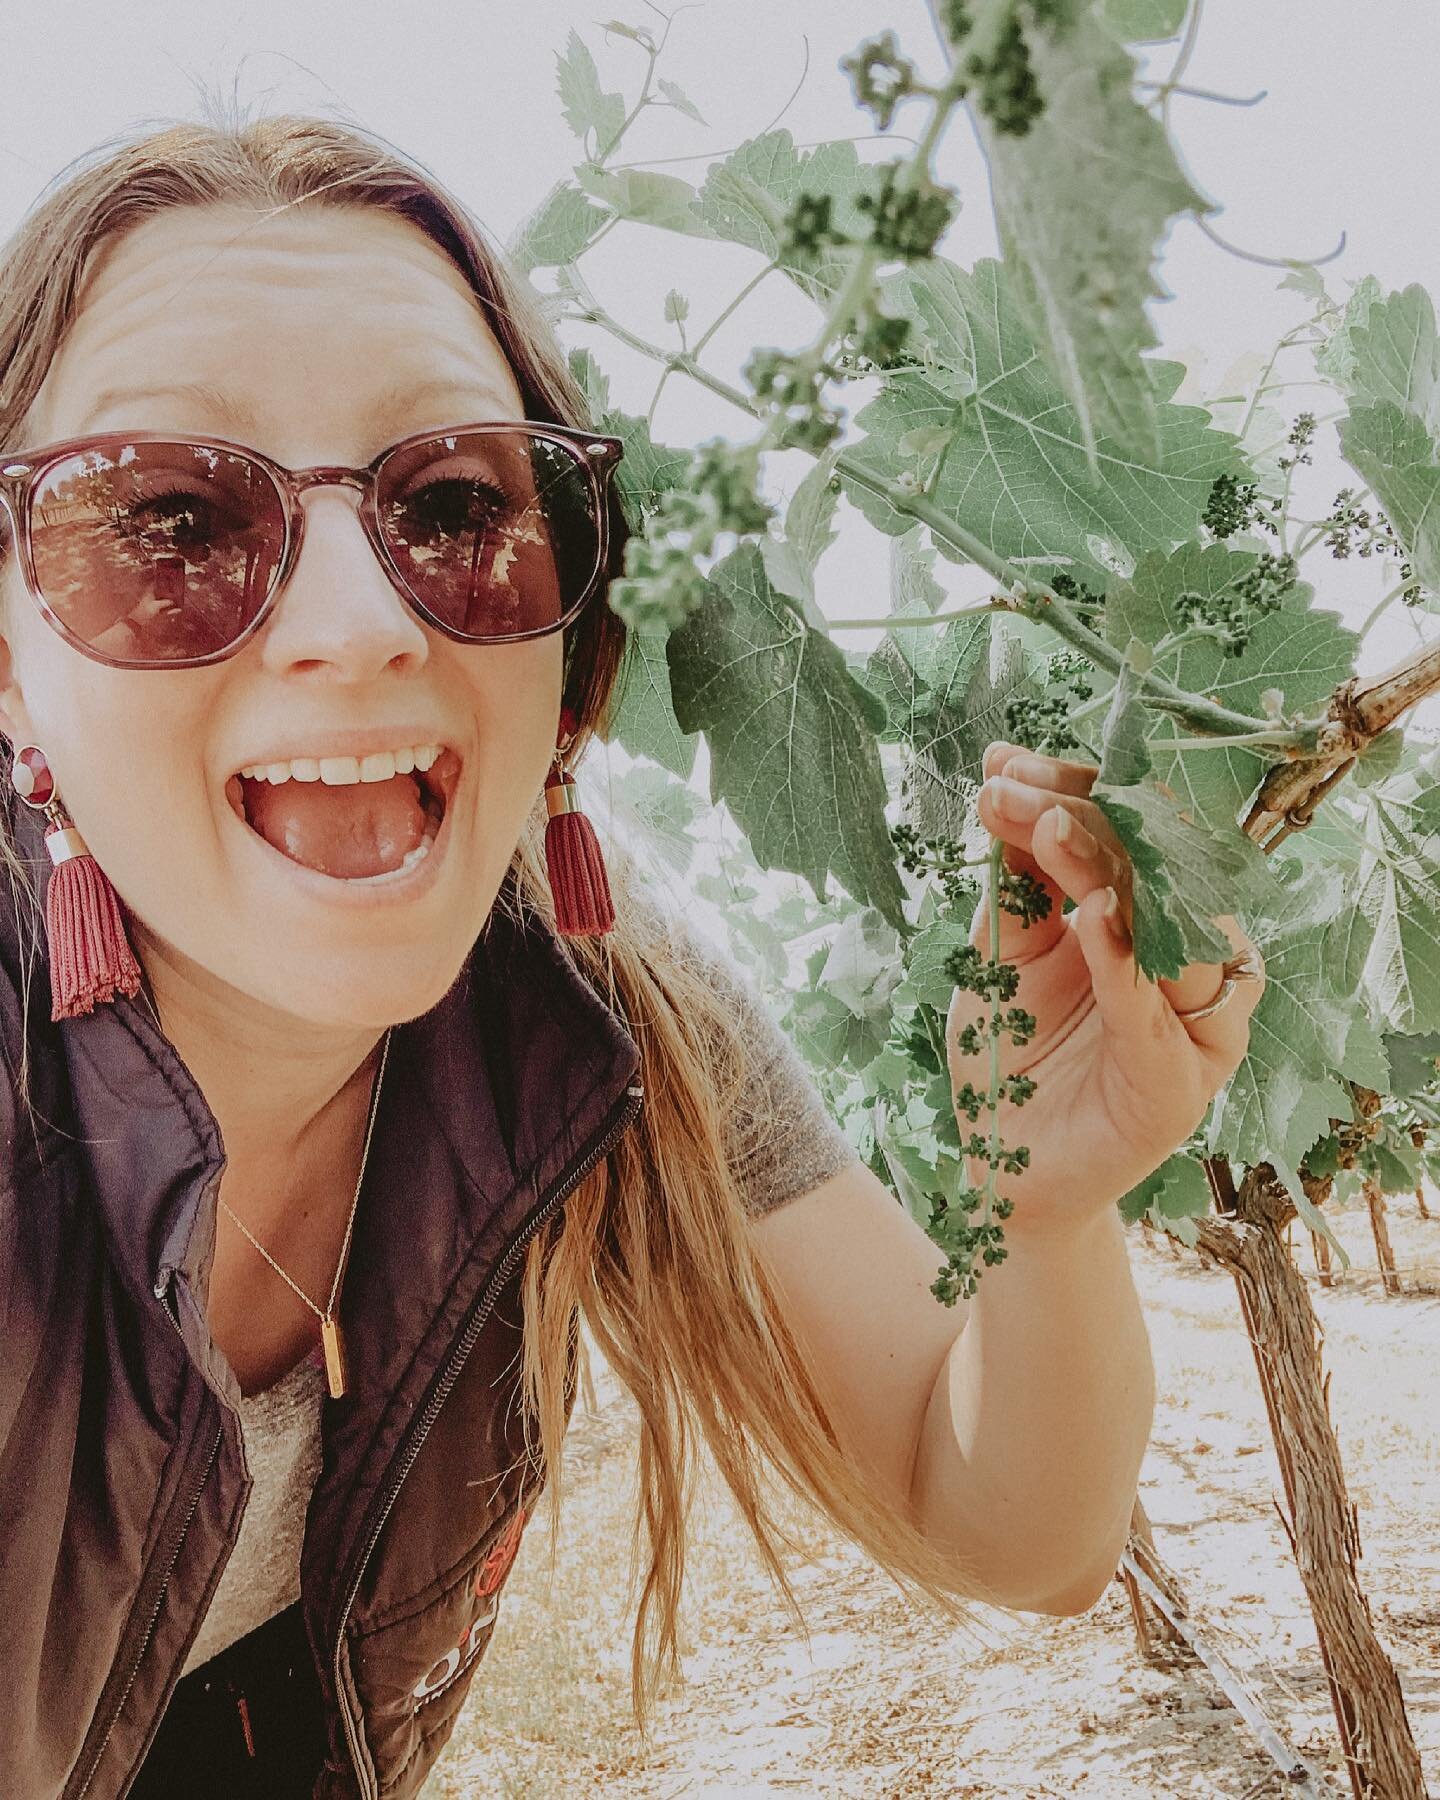 FUTURE ROS&Eacute; IN THE MAKING🍇
It&rsquo;s International Ros&eacute; Day, and I&rsquo;m hanging with some Syrah grapes that will be picked for ros&eacute; in a few months🥳! Speaking of grapes, let&rsquo;s talk about the next big stage in grapevin